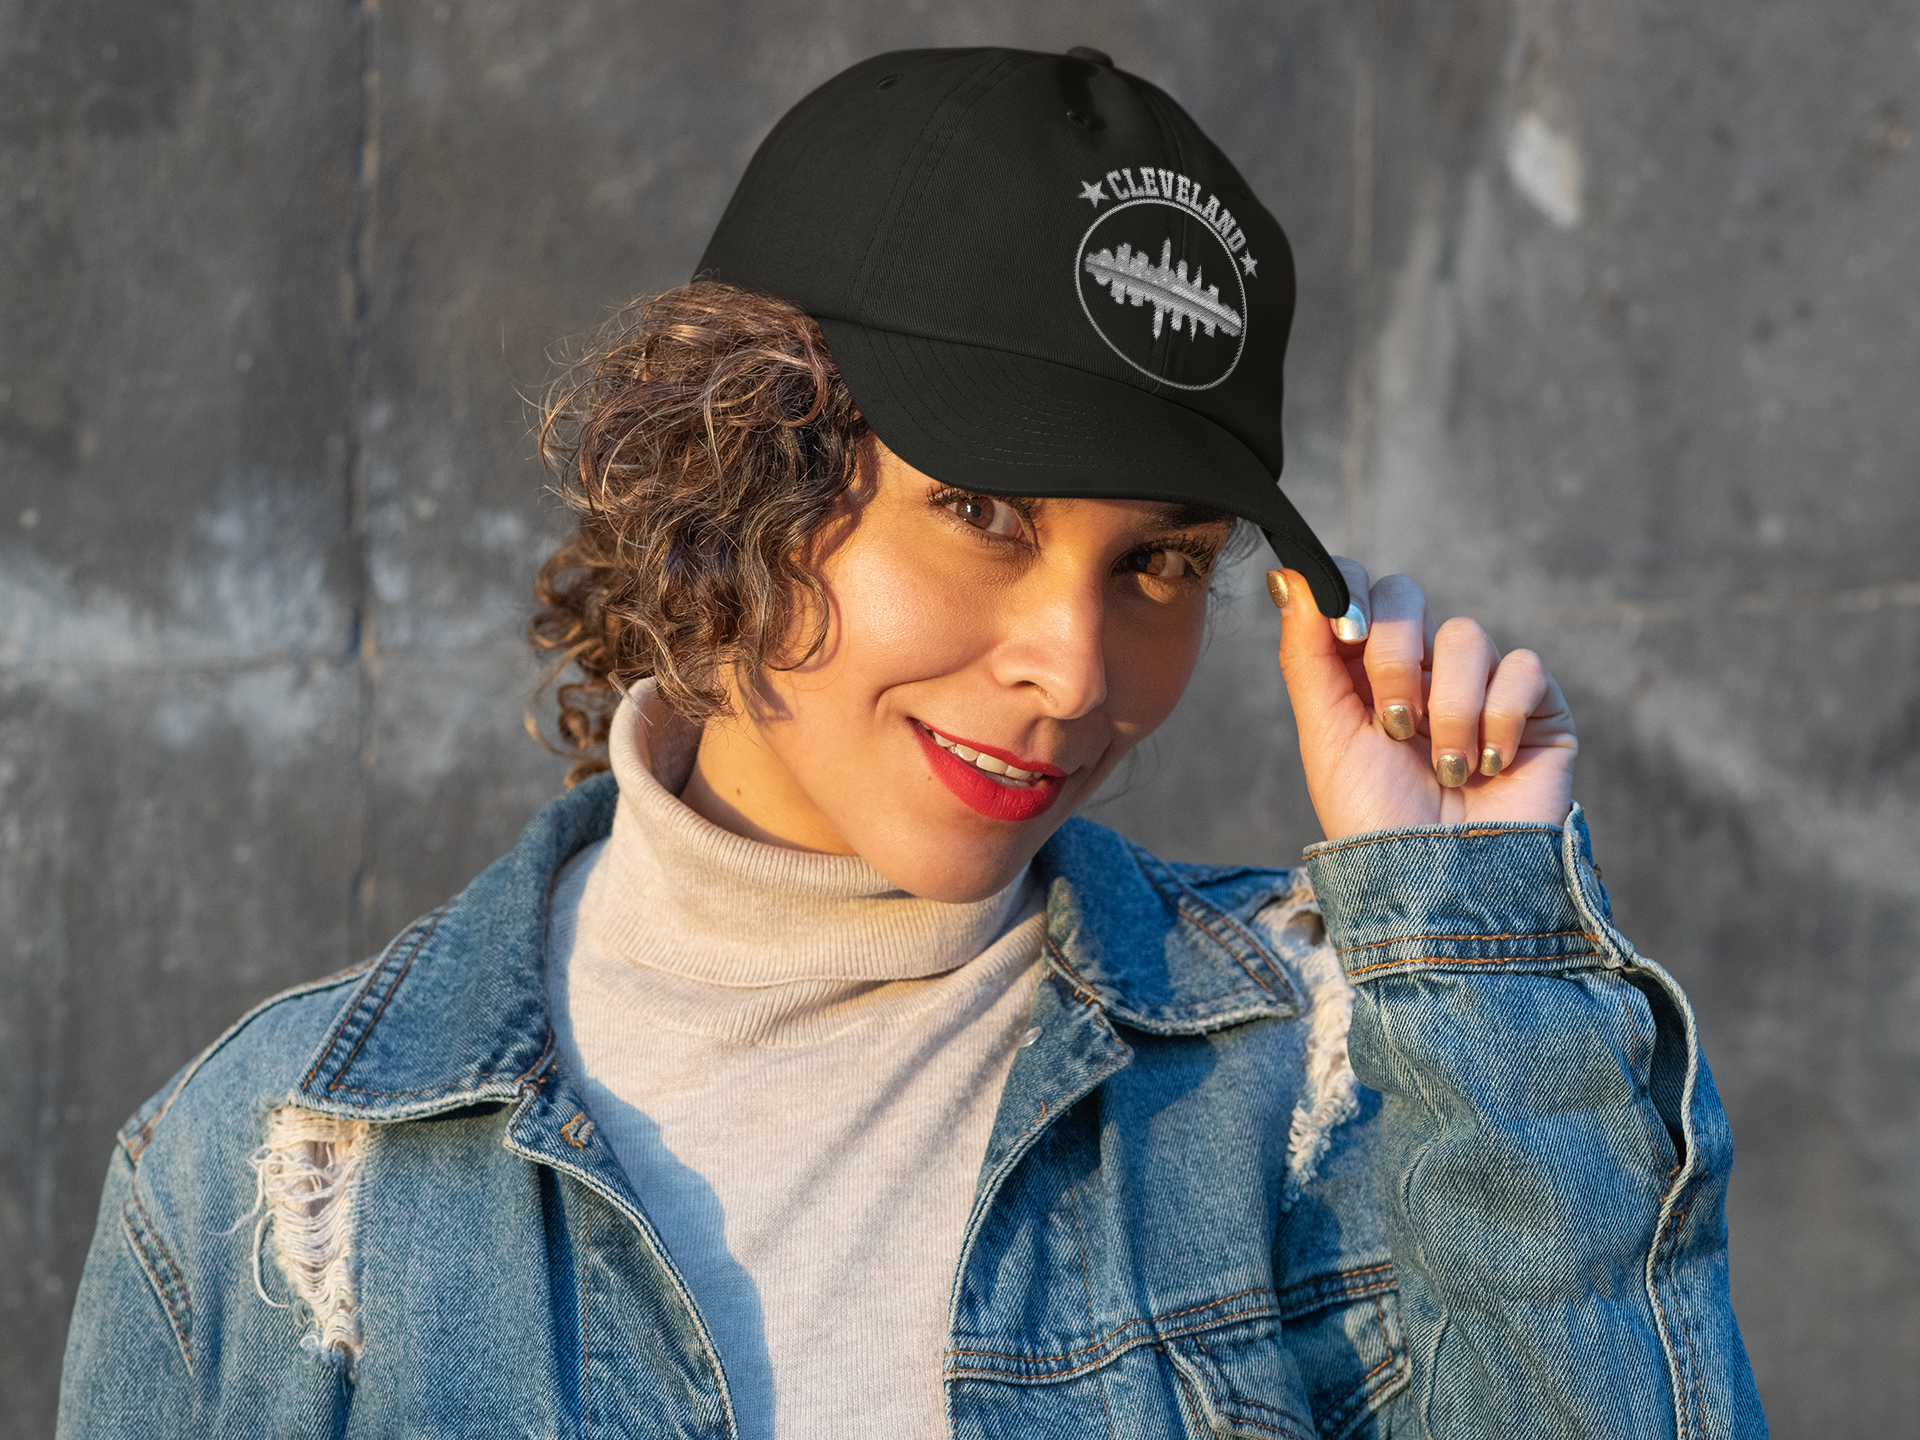 Unisex Twill Hat Higher Quality Materials(cleveland)